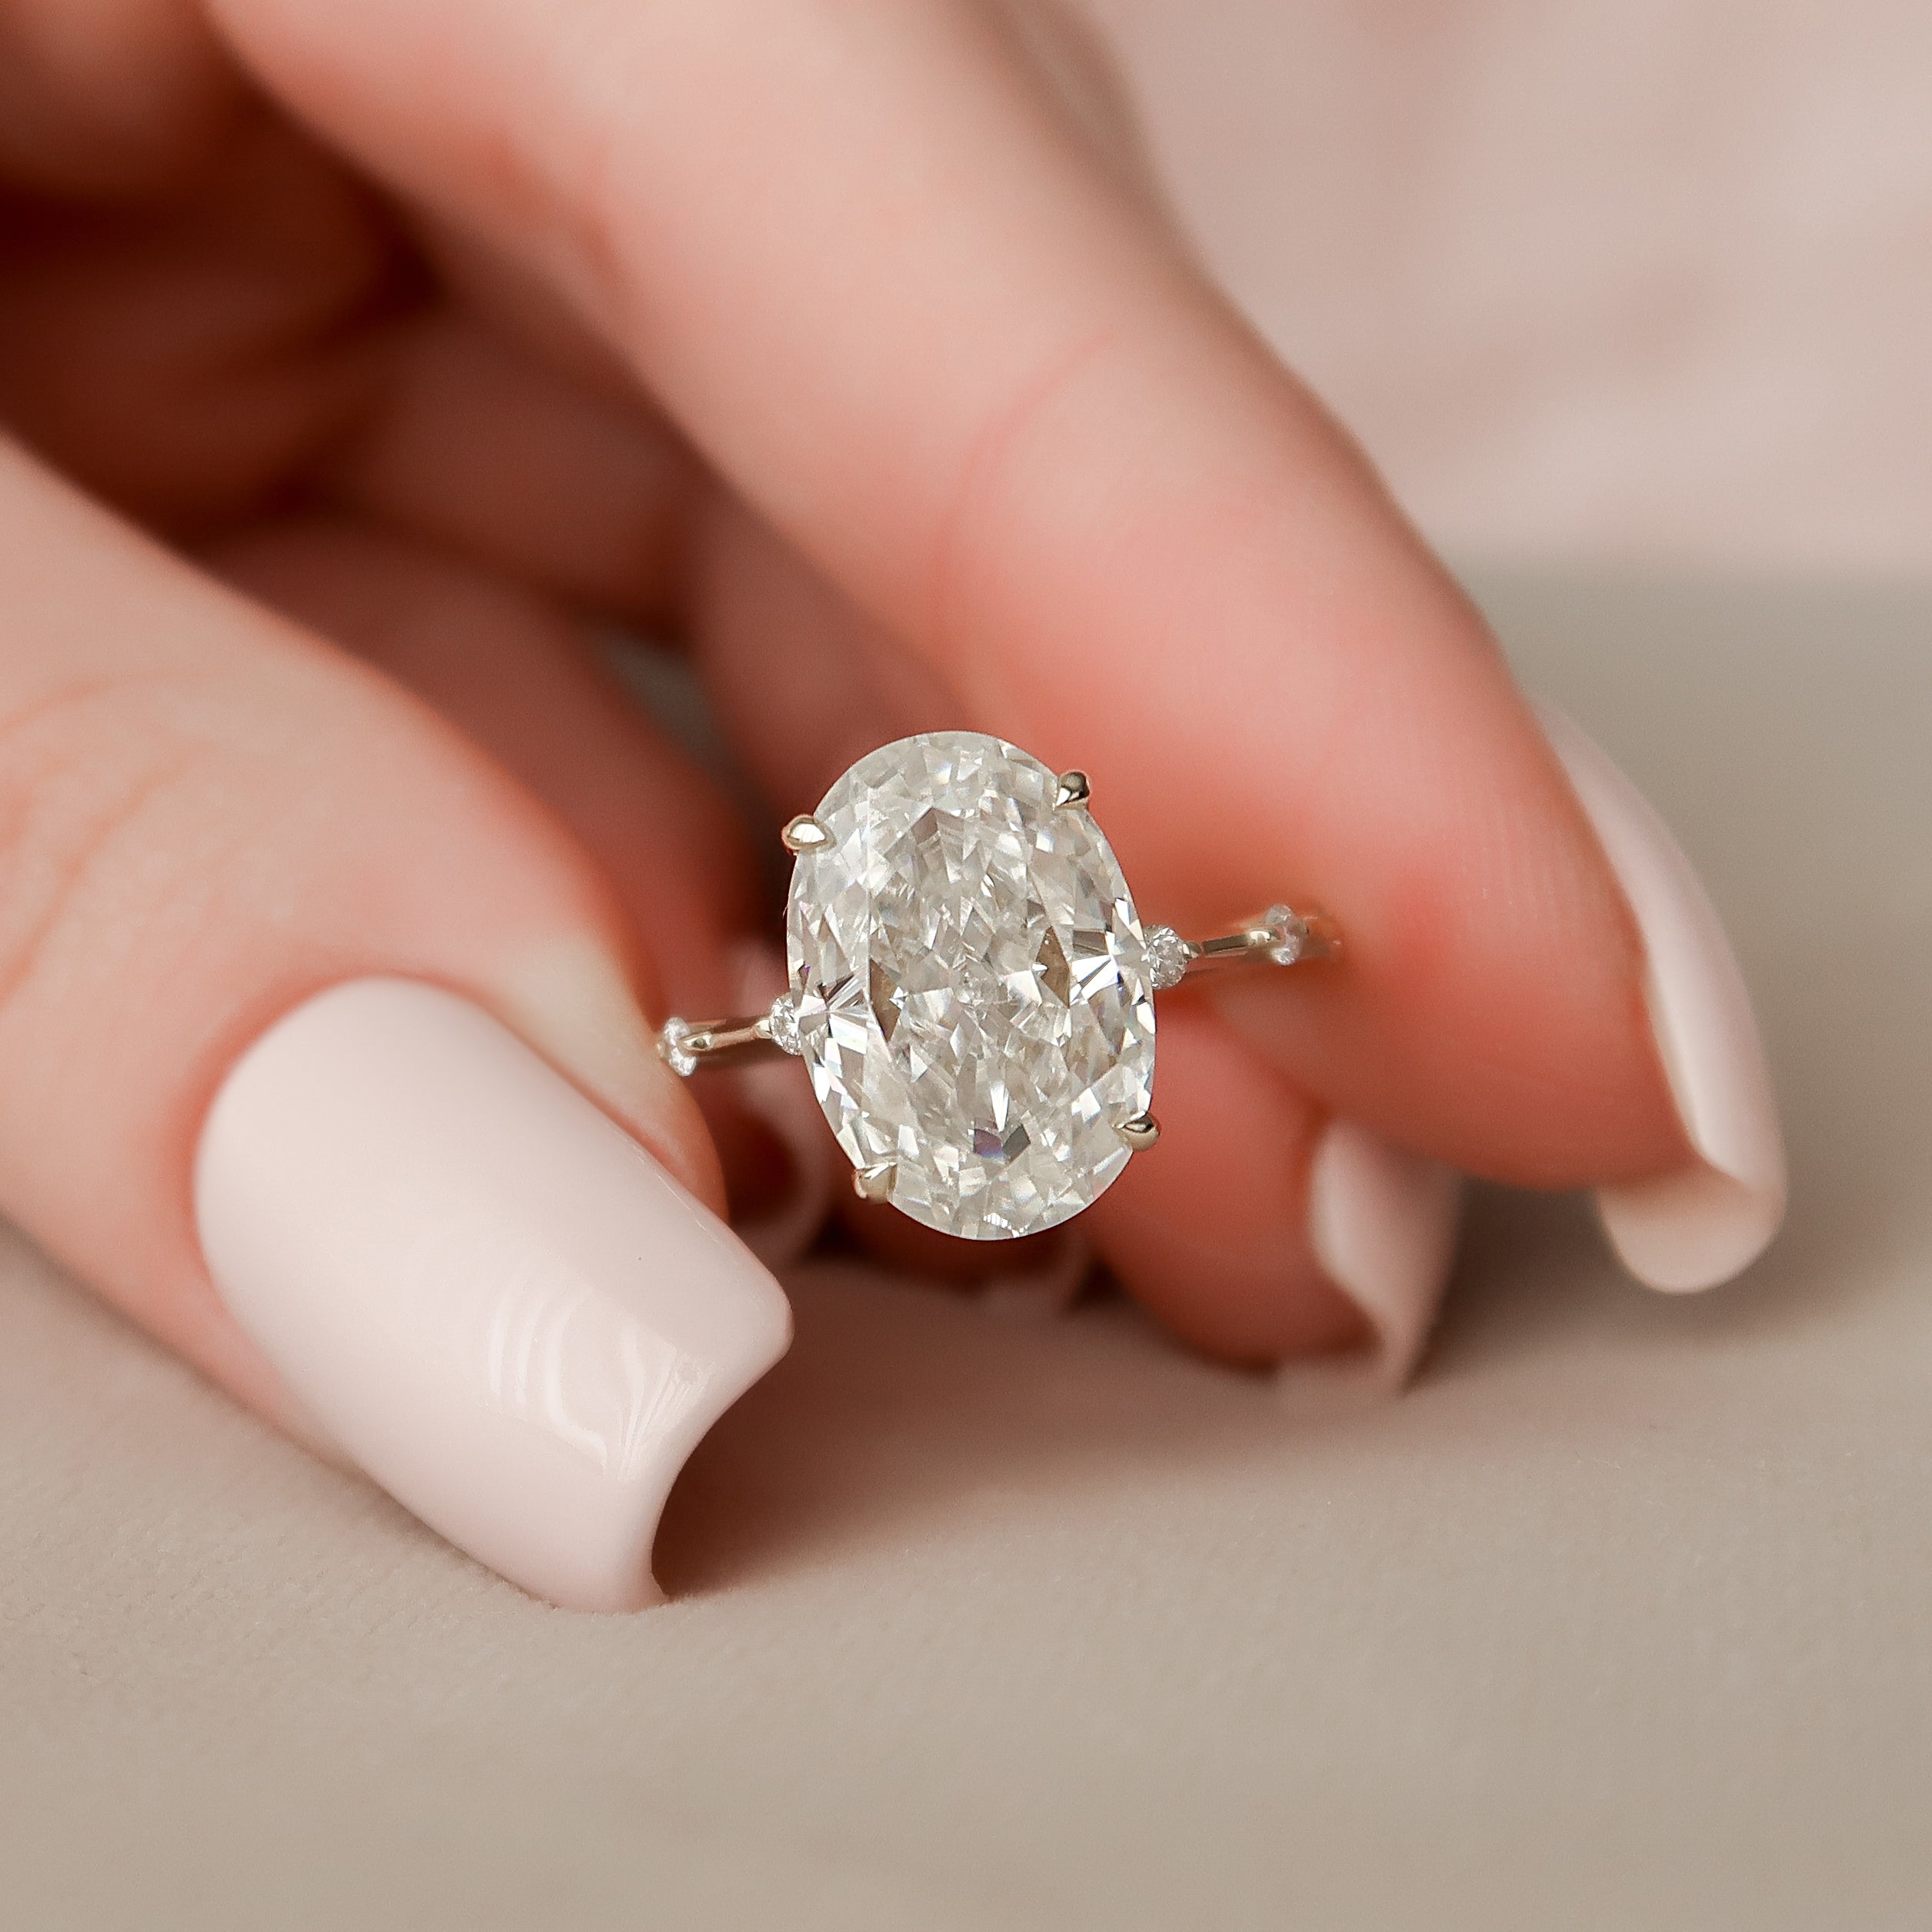 Is it weird/wrong to wear a ring on my left ring finger? Not  engaged/married. | Weddings, Etiquette and Advice | Wedding Forums |  WeddingWire